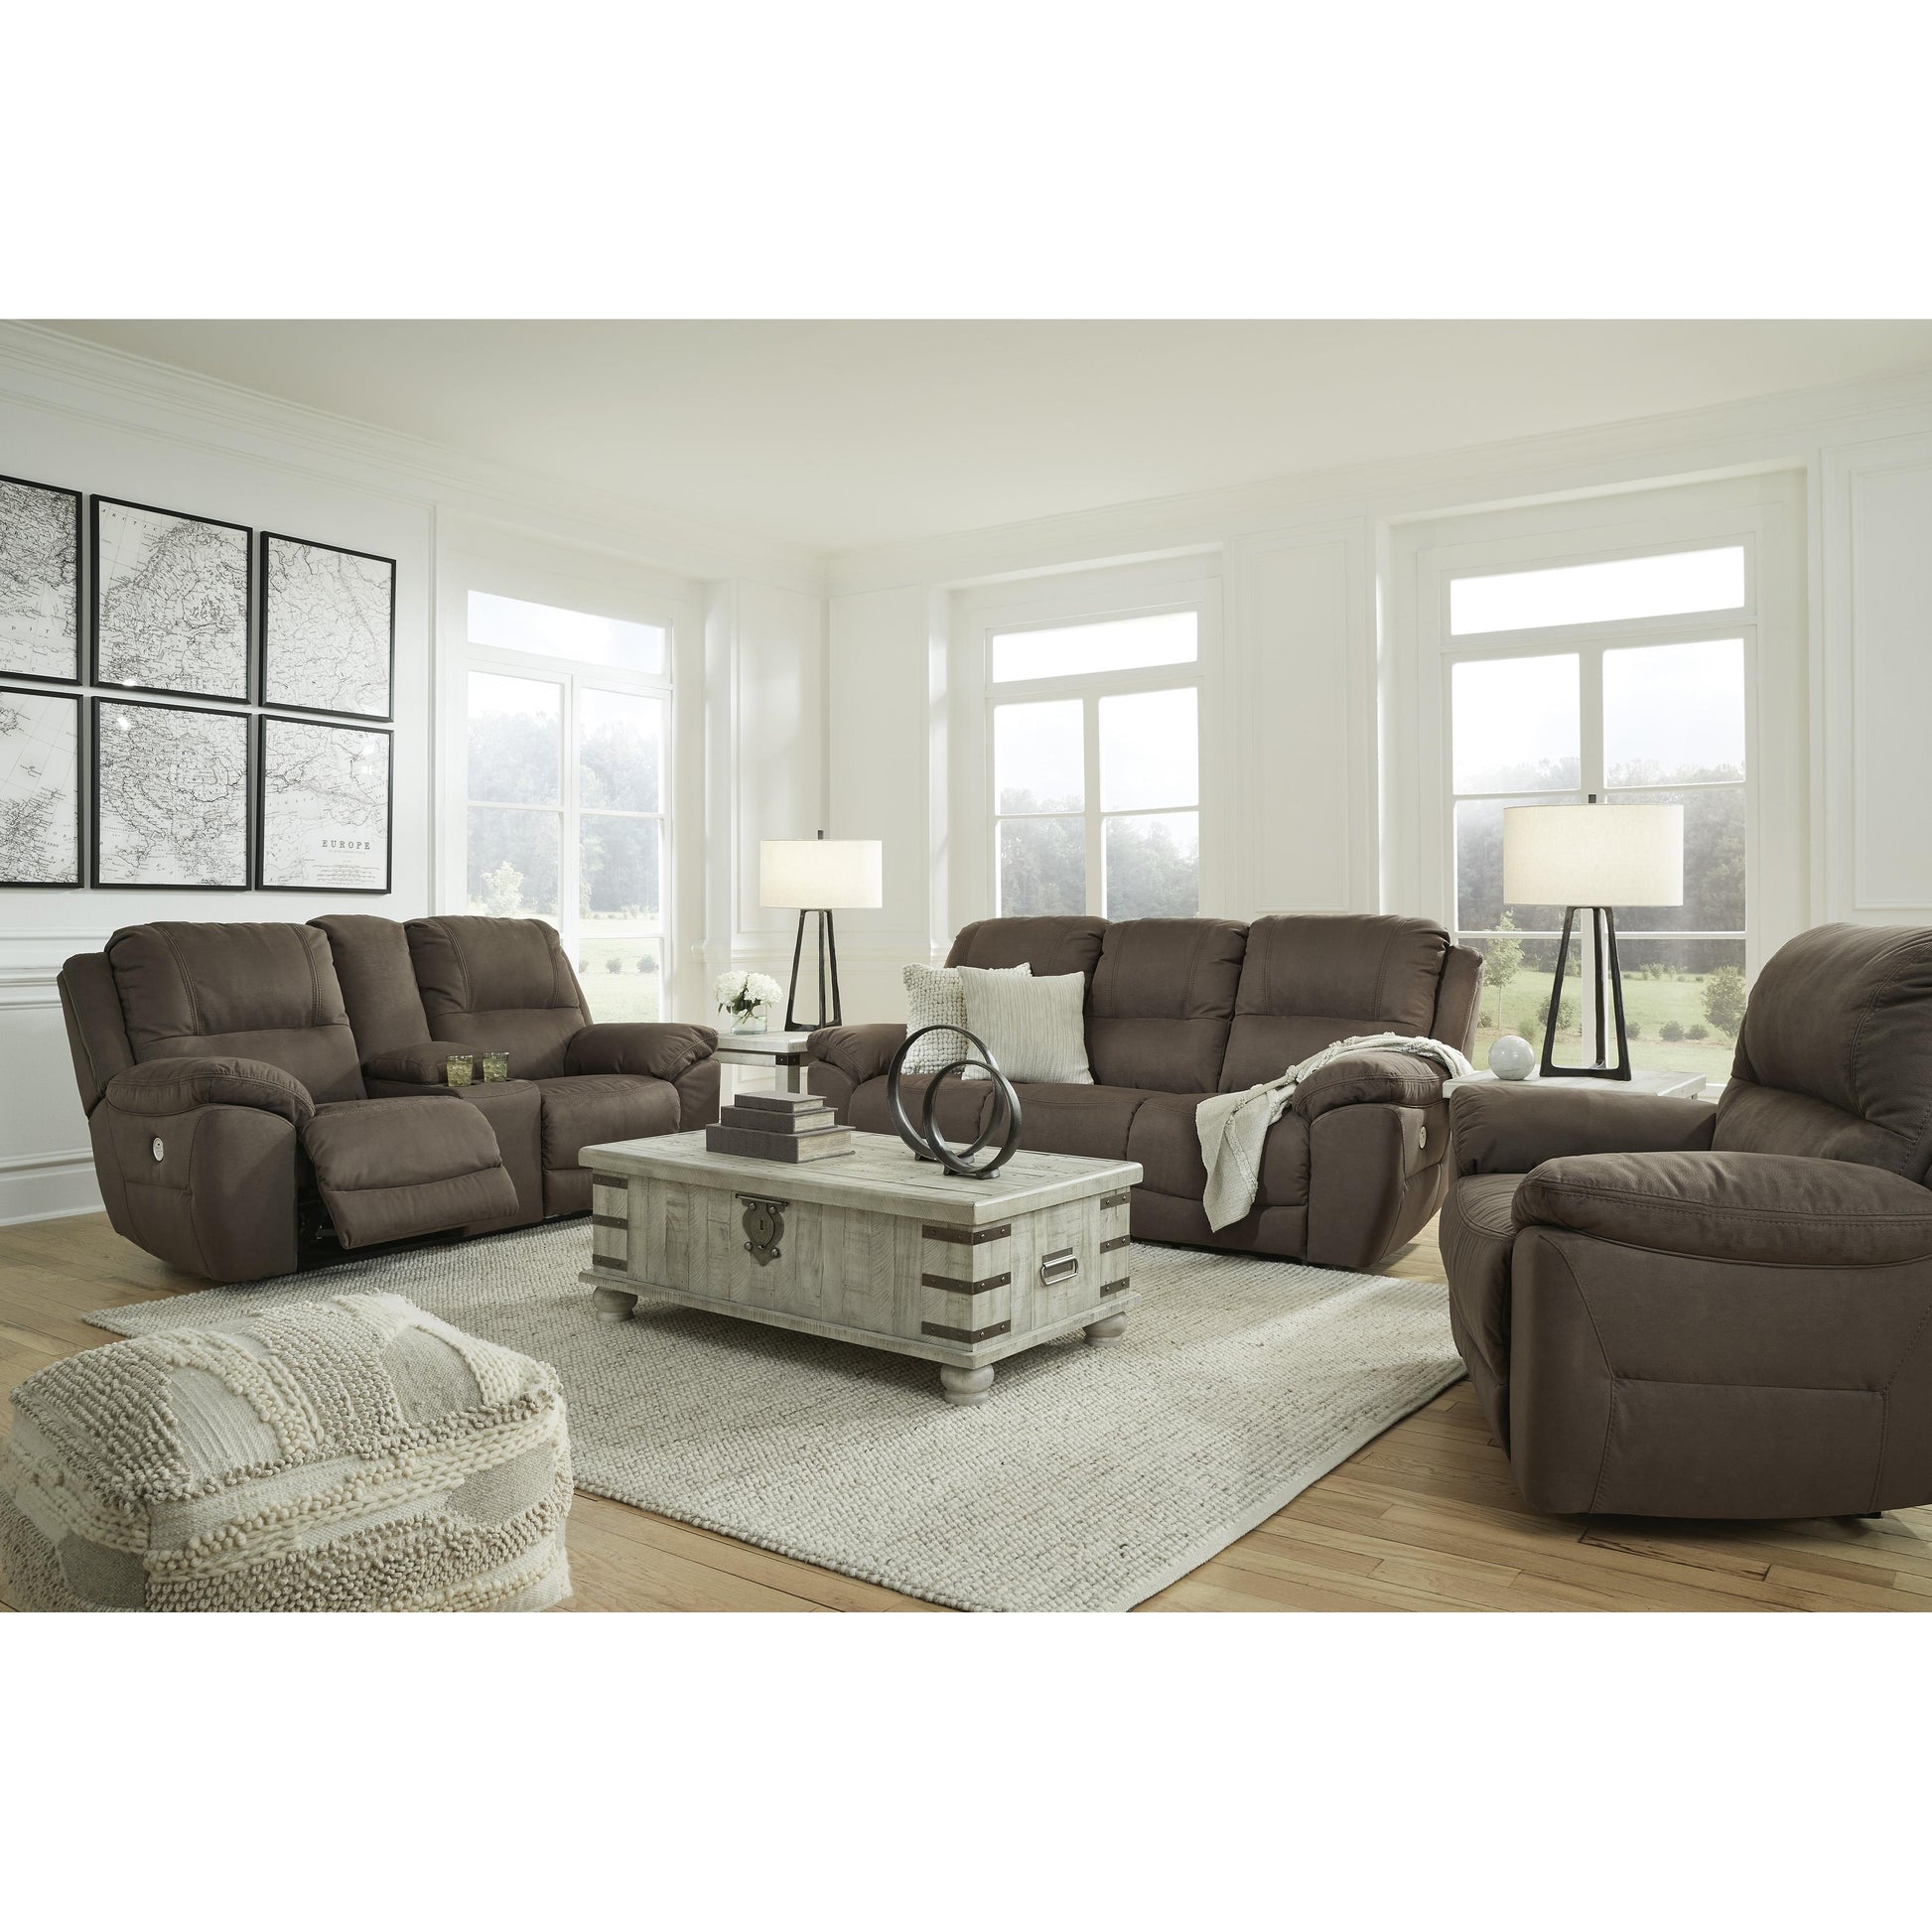 Signature Design by Ashley Next-Gen Gaucho Leather Look Recliner with Wall Recline 5420452 IMAGE 9